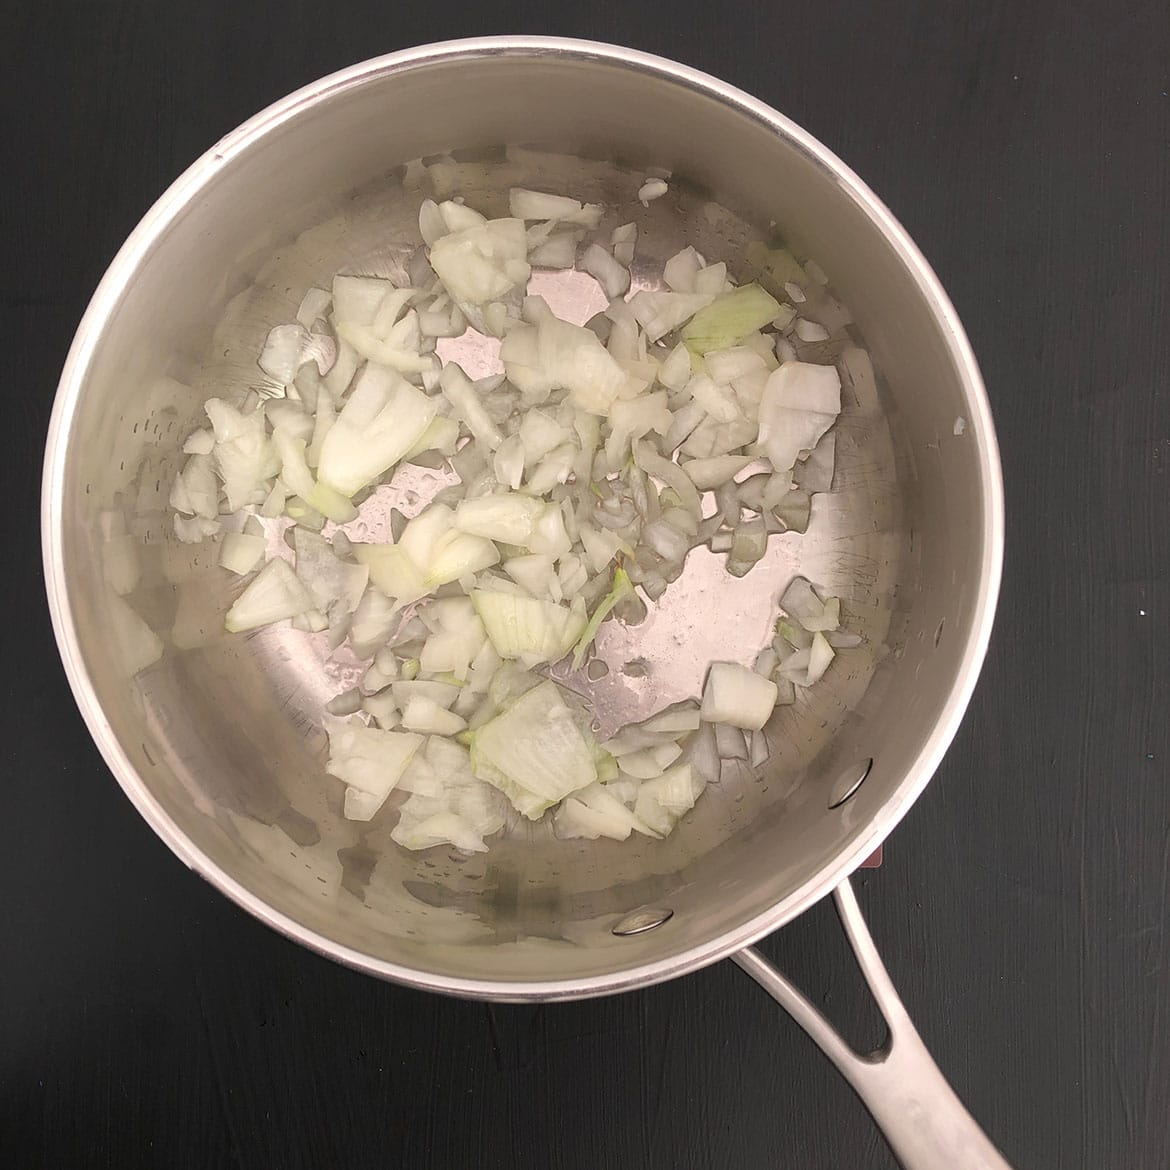 Top-down view of onions in a saucepan.